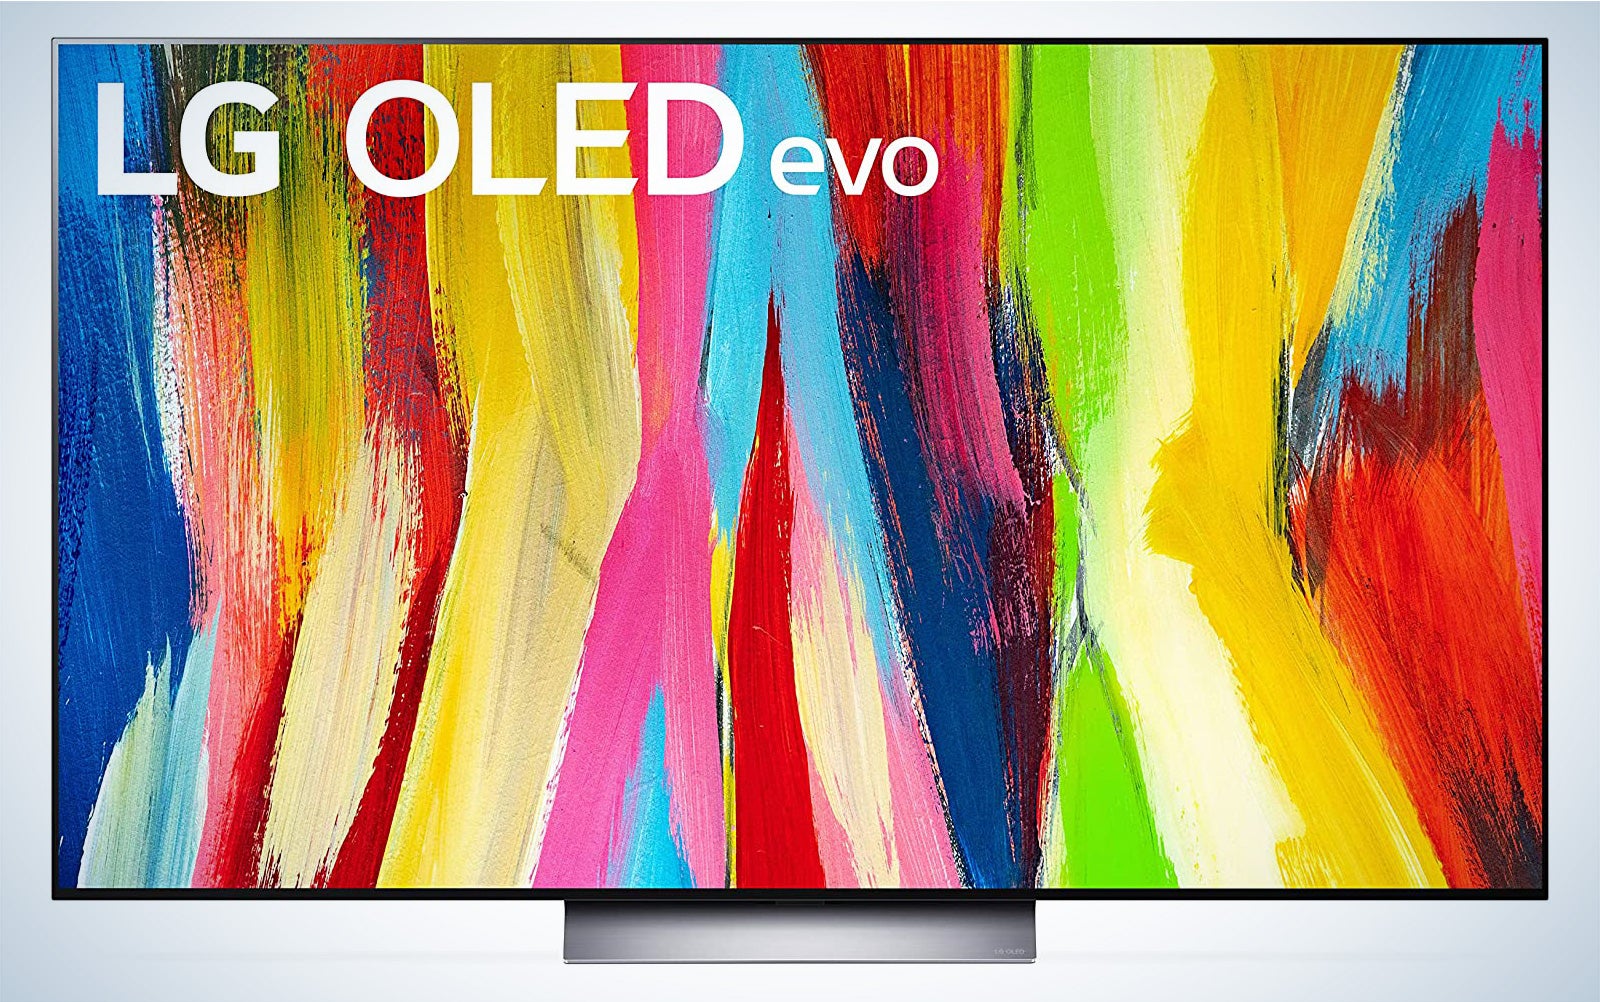 LG C2 OLED TV with a colorful graphic on the screen